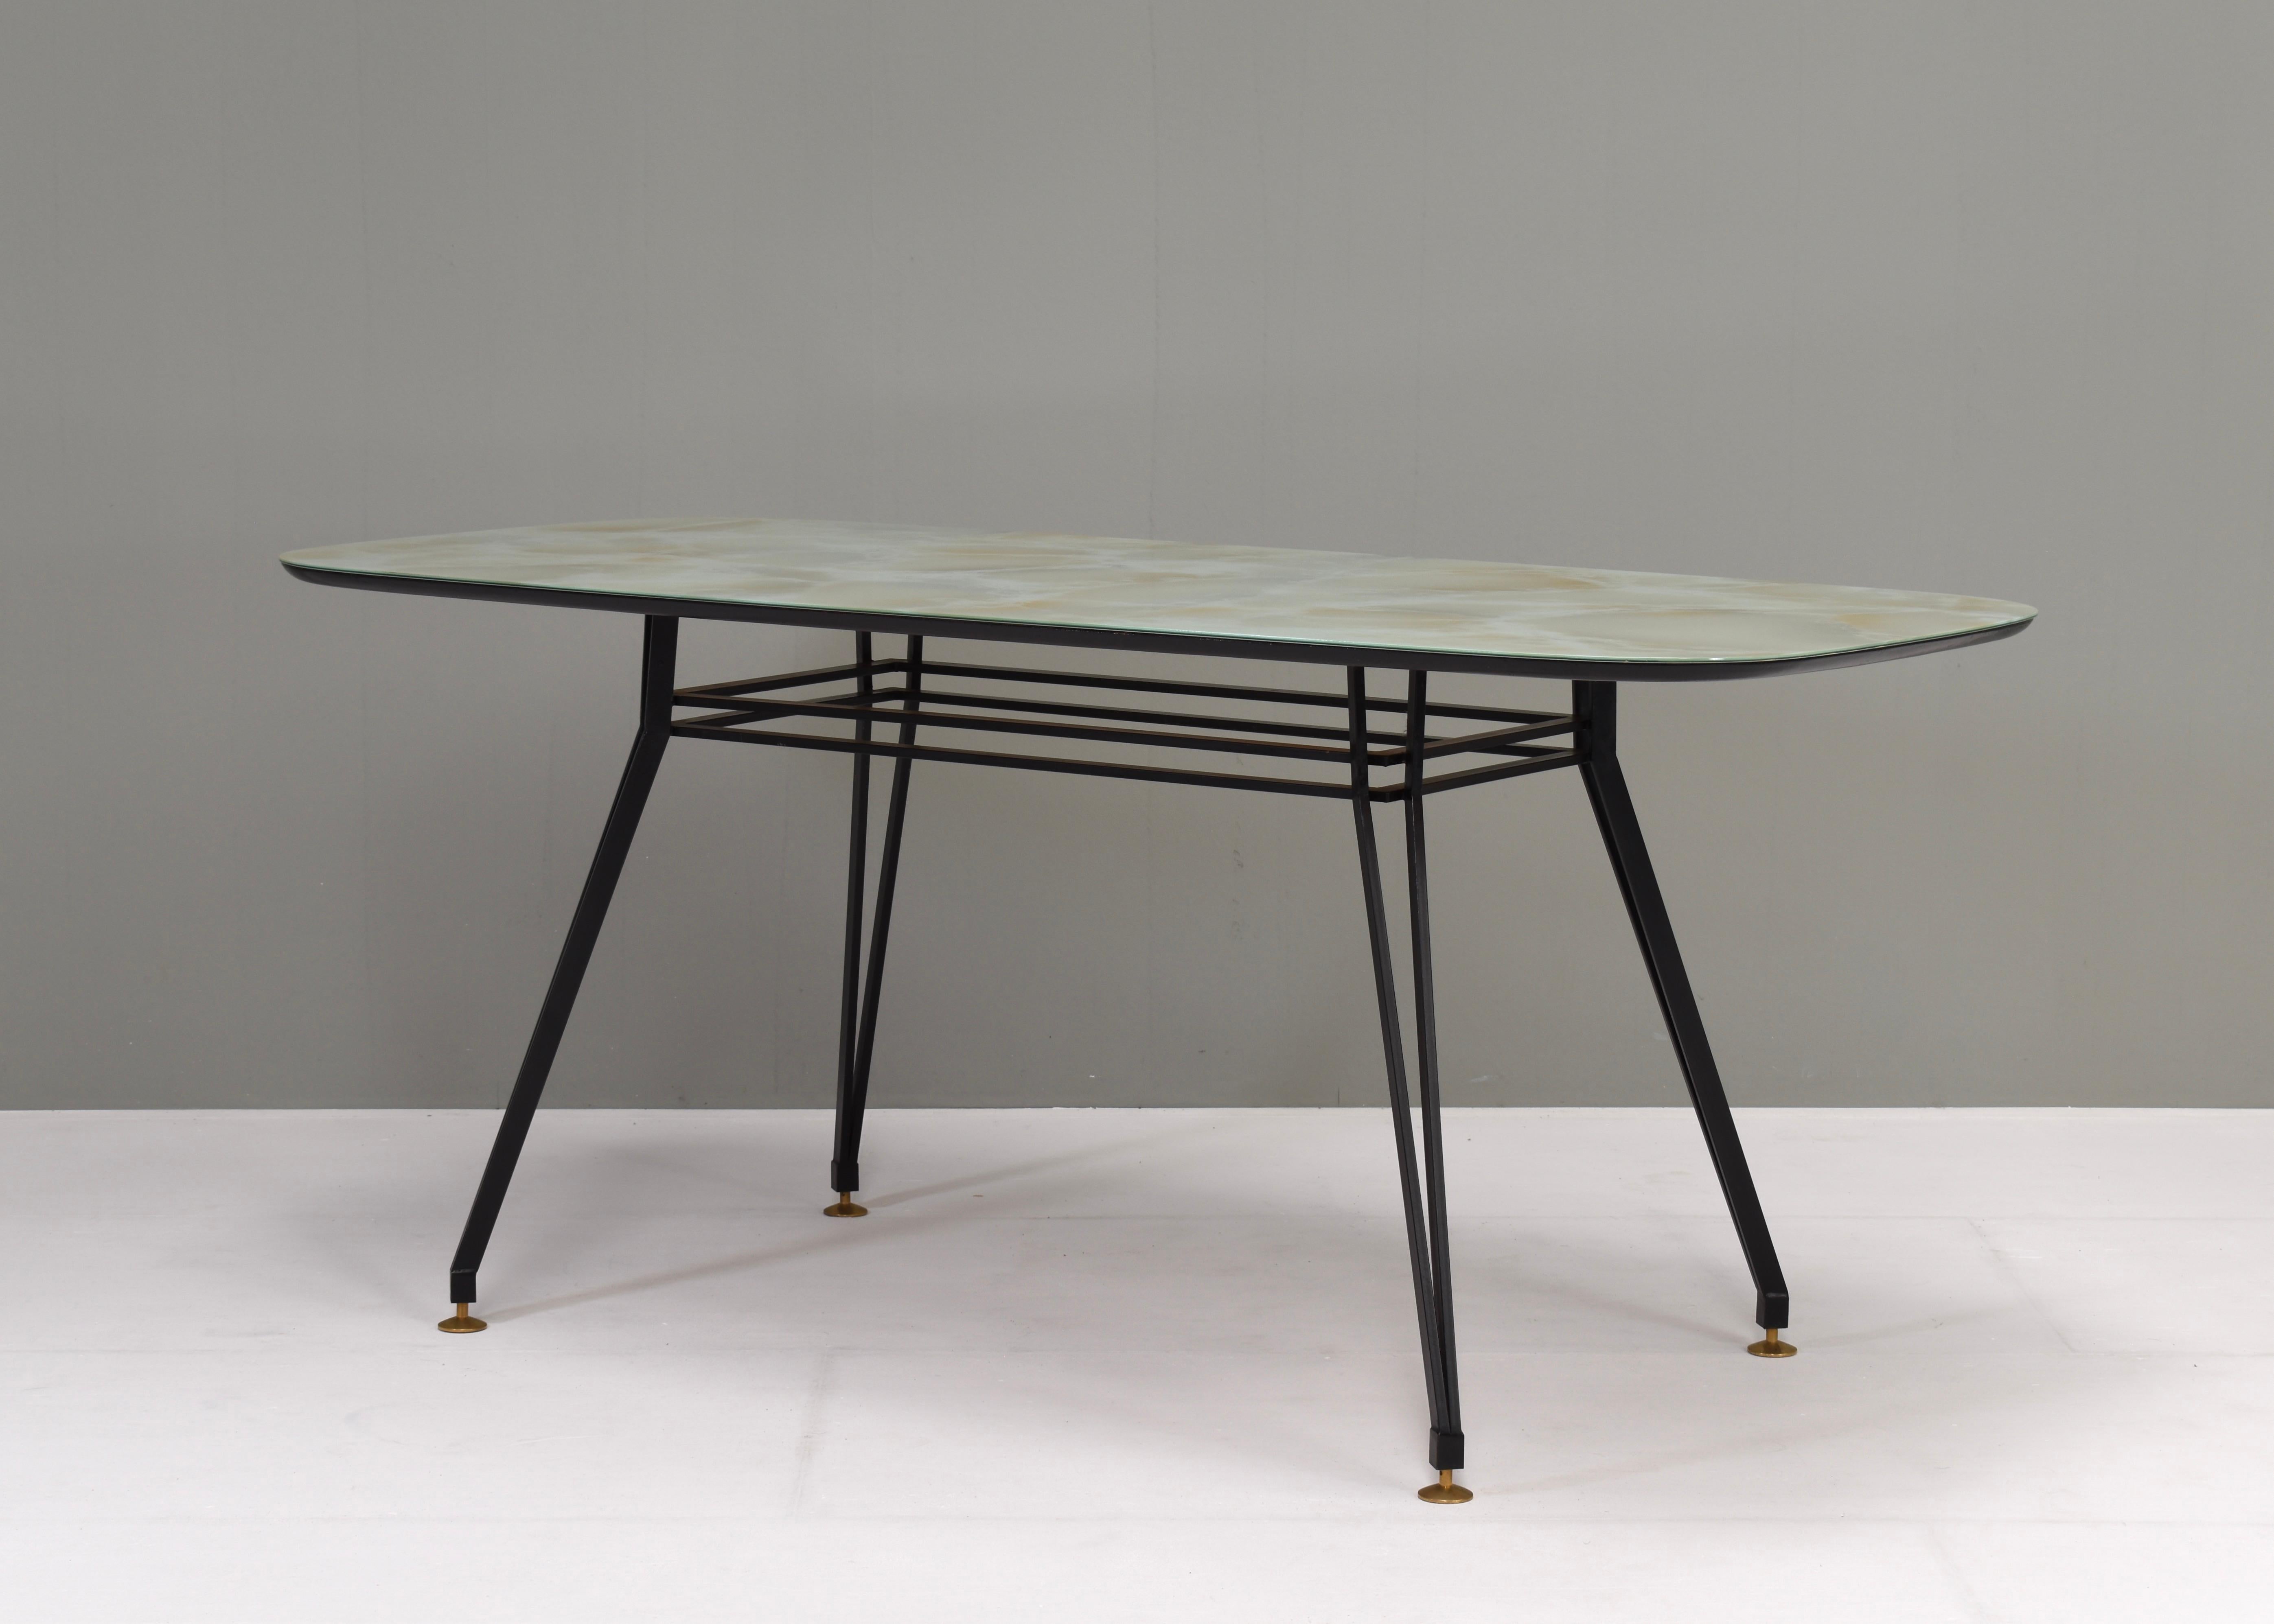 Italian dining table from the 1950’s.
The table has a black lacquered metal base with in height adjustable brass feet. The table top has a wood edge with a glass top and a stone print pattern underneath.

Designer: Unknown
Manufacturer: